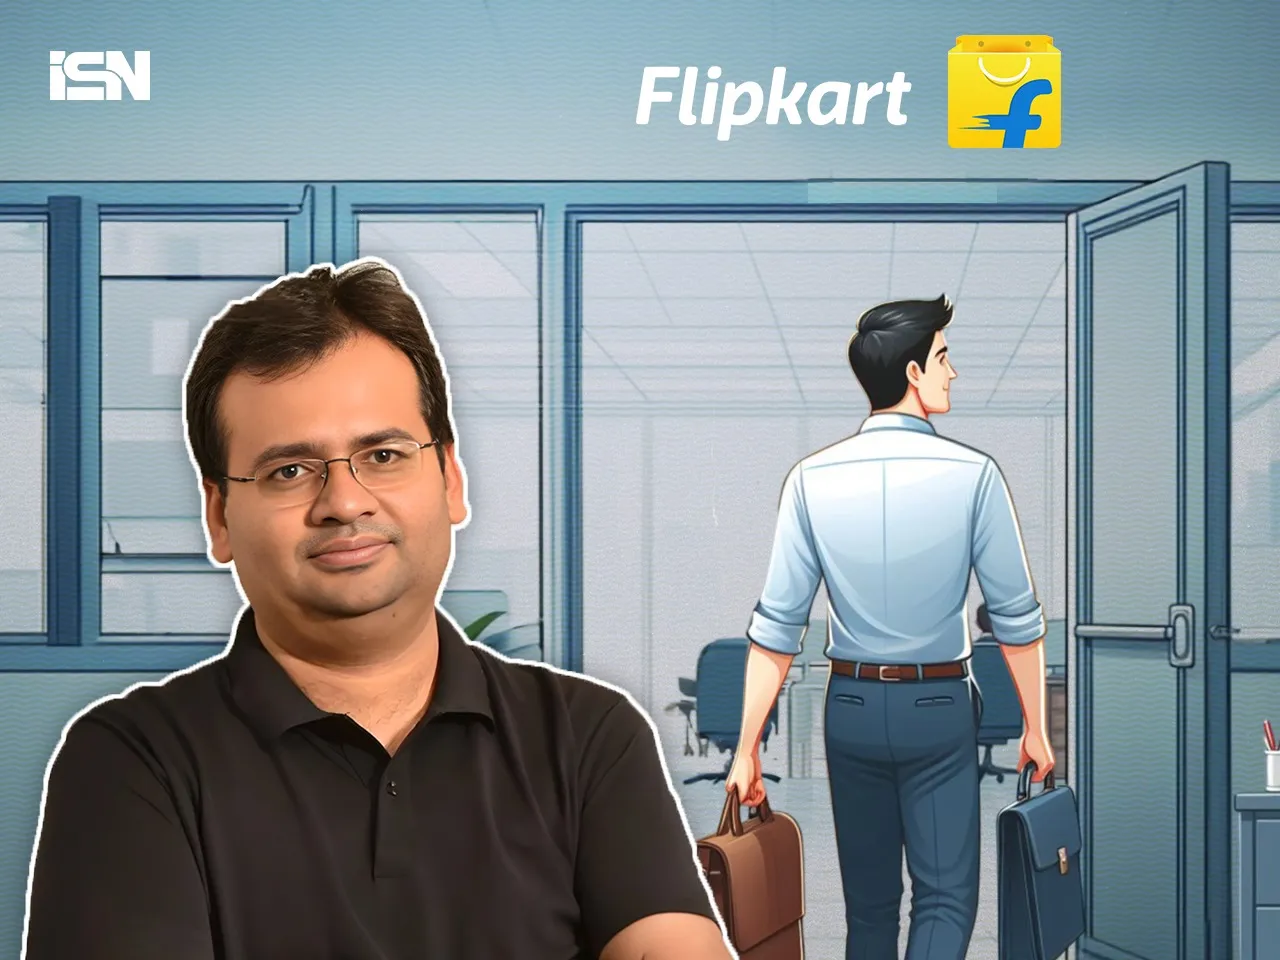 Meesho's CXO Harsh Chaudhary quits to join rival Flipkart